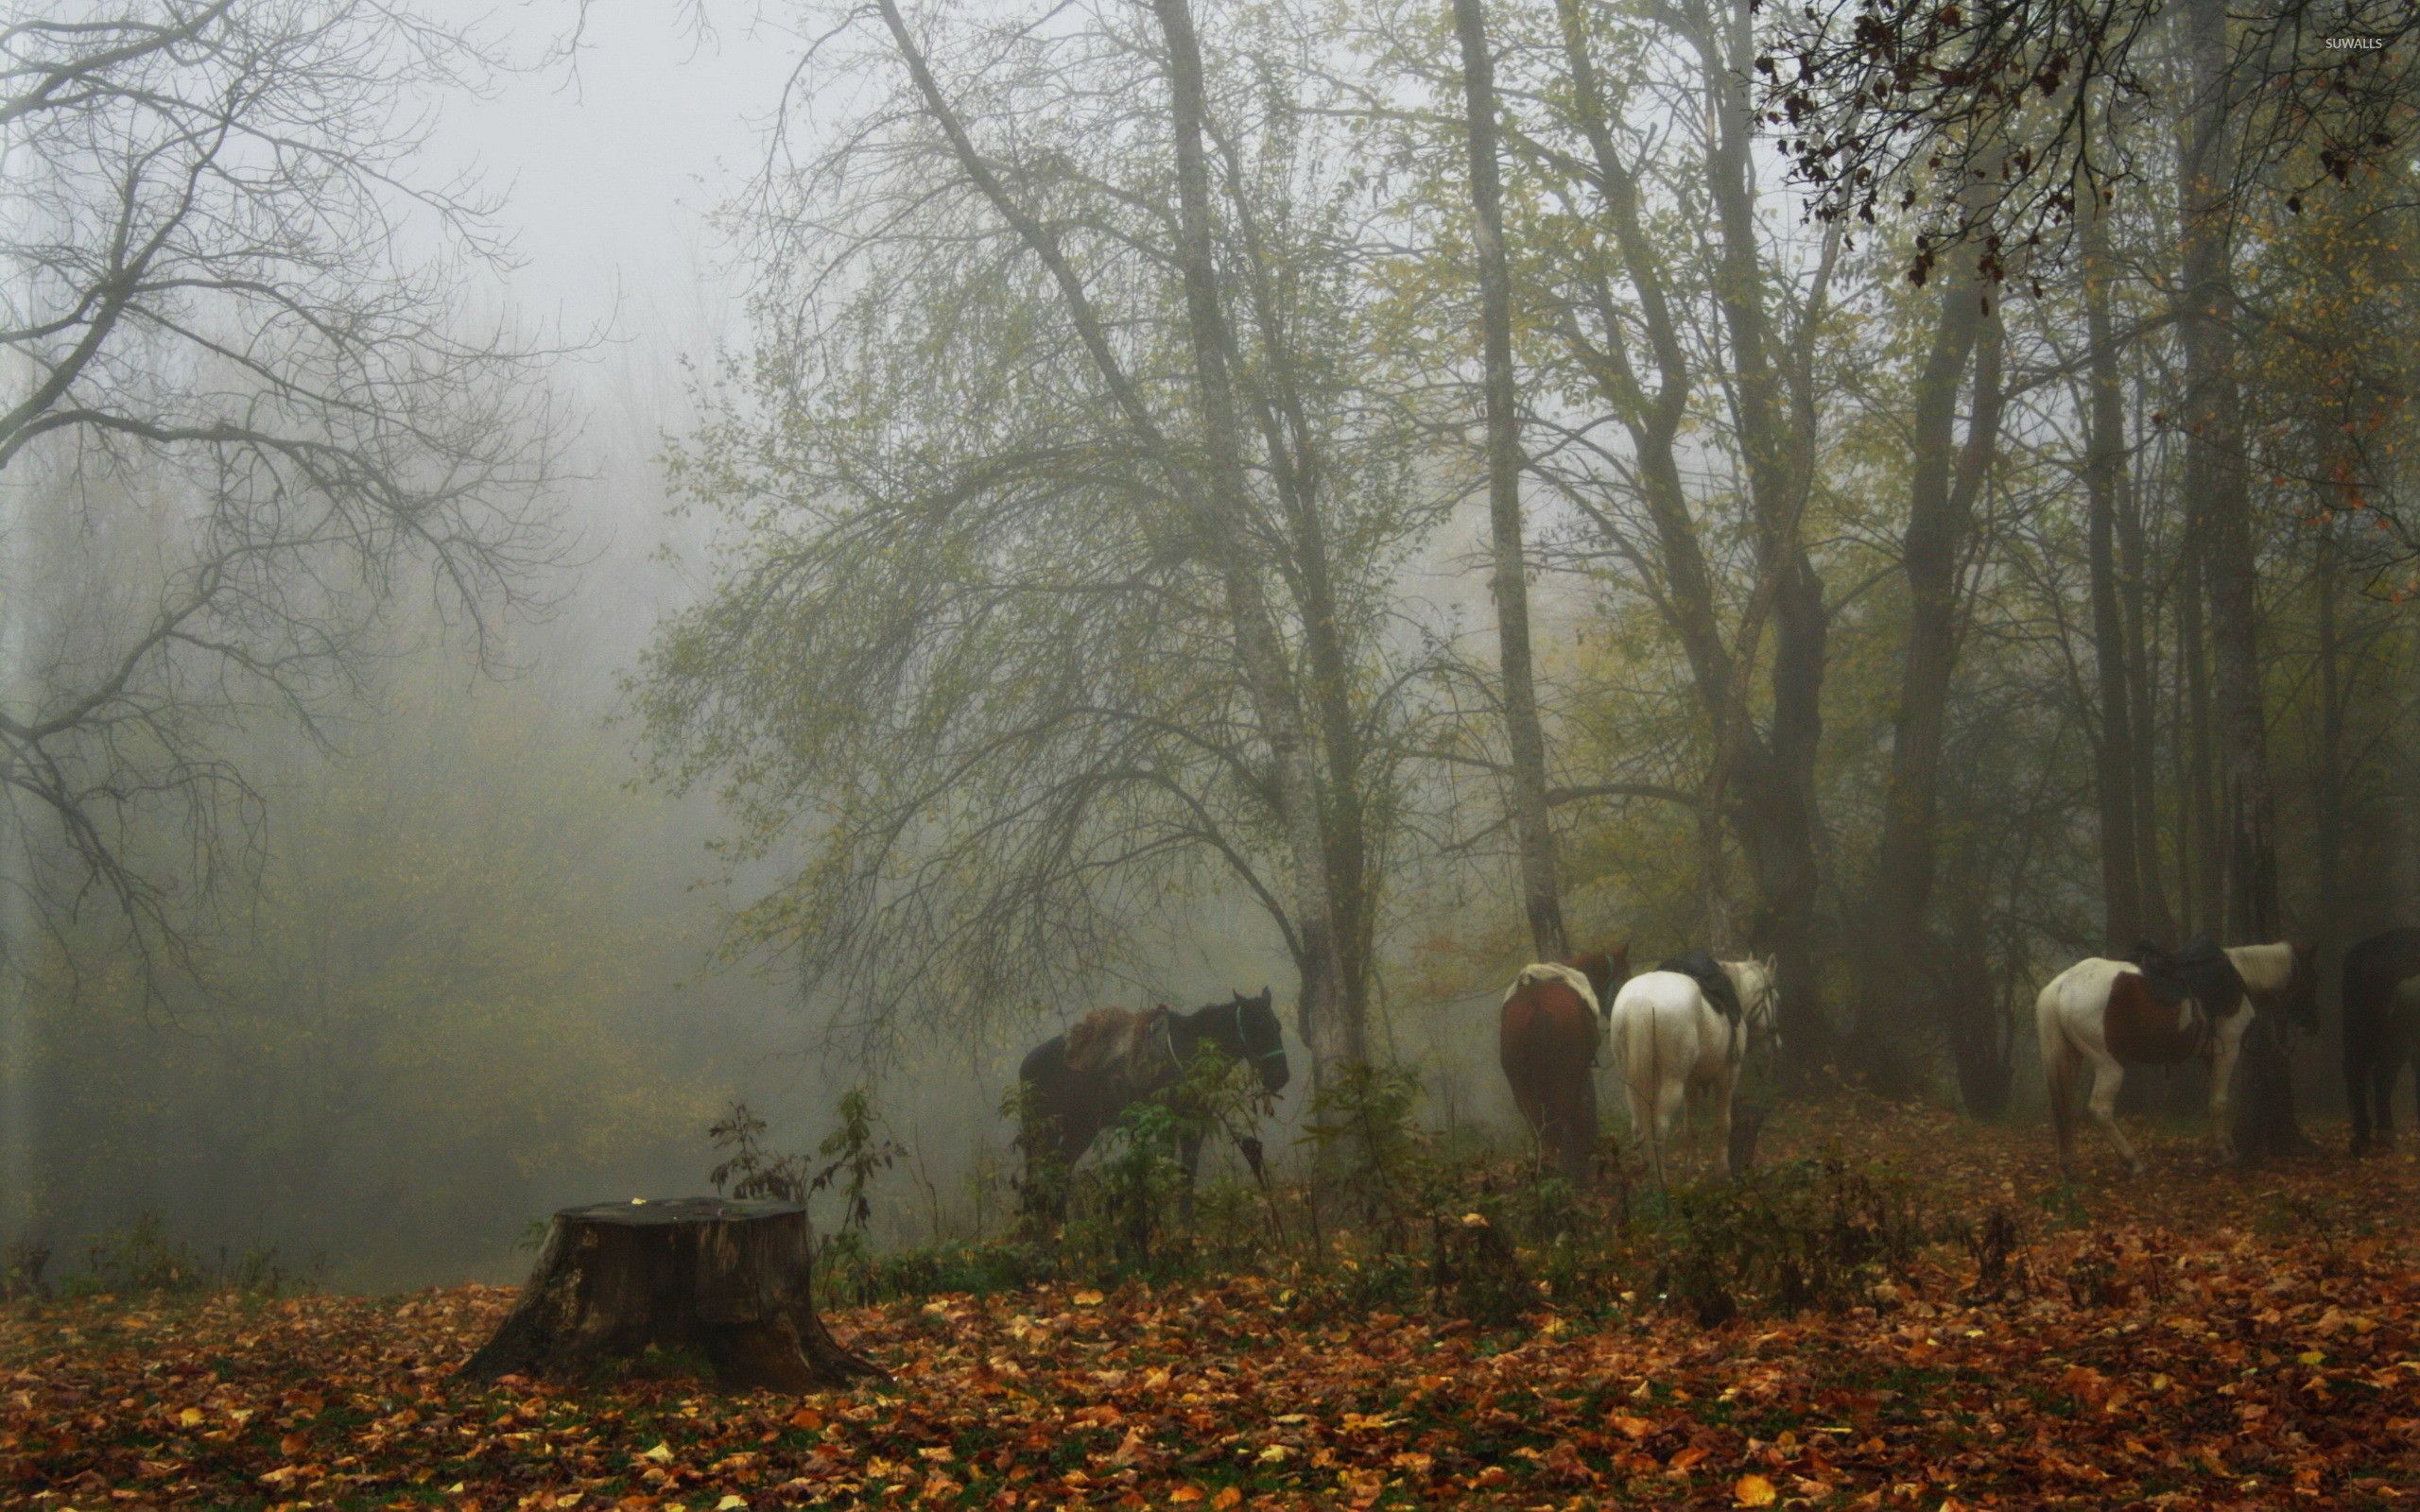 Horses in a foggy forest wallpaper